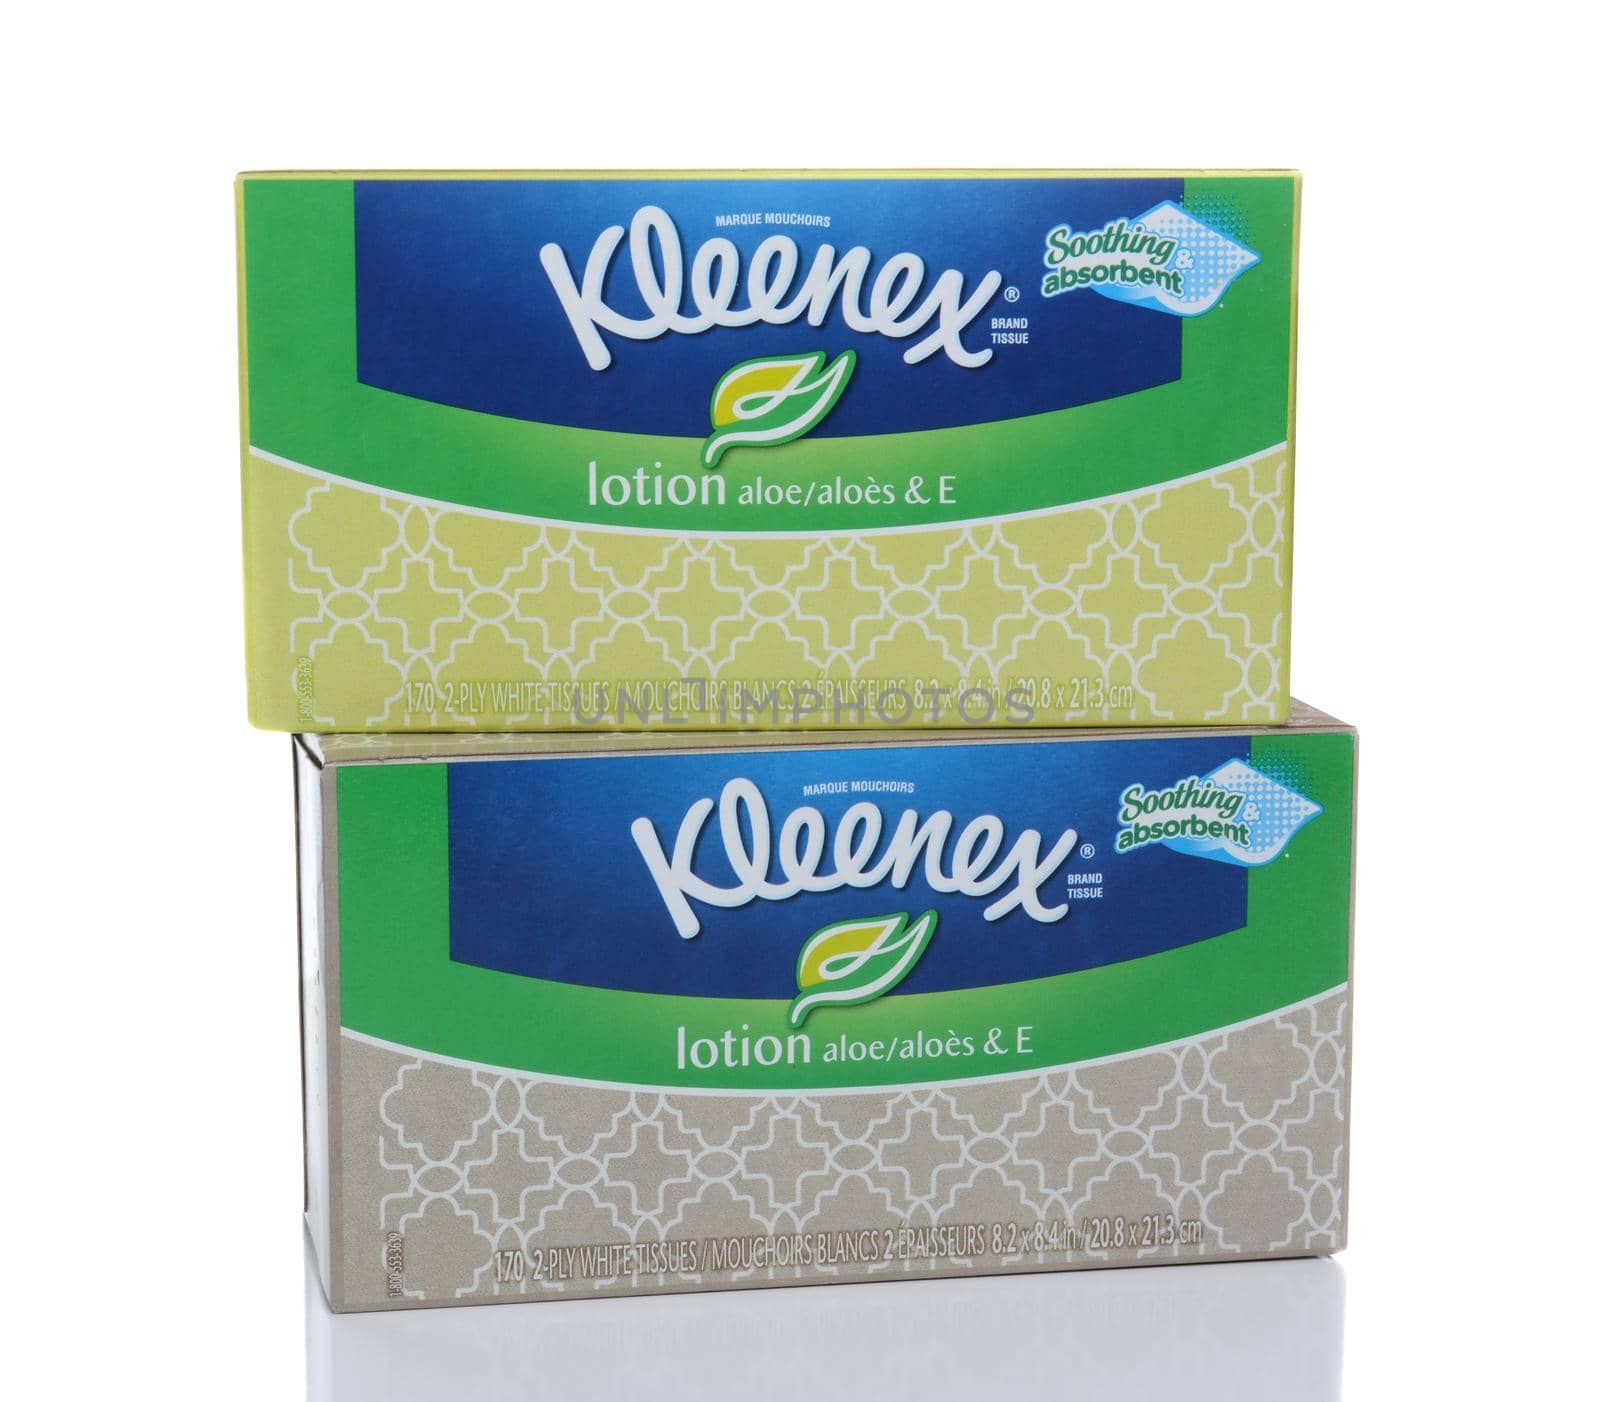 IRVINE, CA - FEBRUARY 19, 2015: Kleenex Tissues with Lotion.  Kleenex is a trademark of Kimberly-Clark Worldwide, Inc. They make a variety of paper products under the brand.